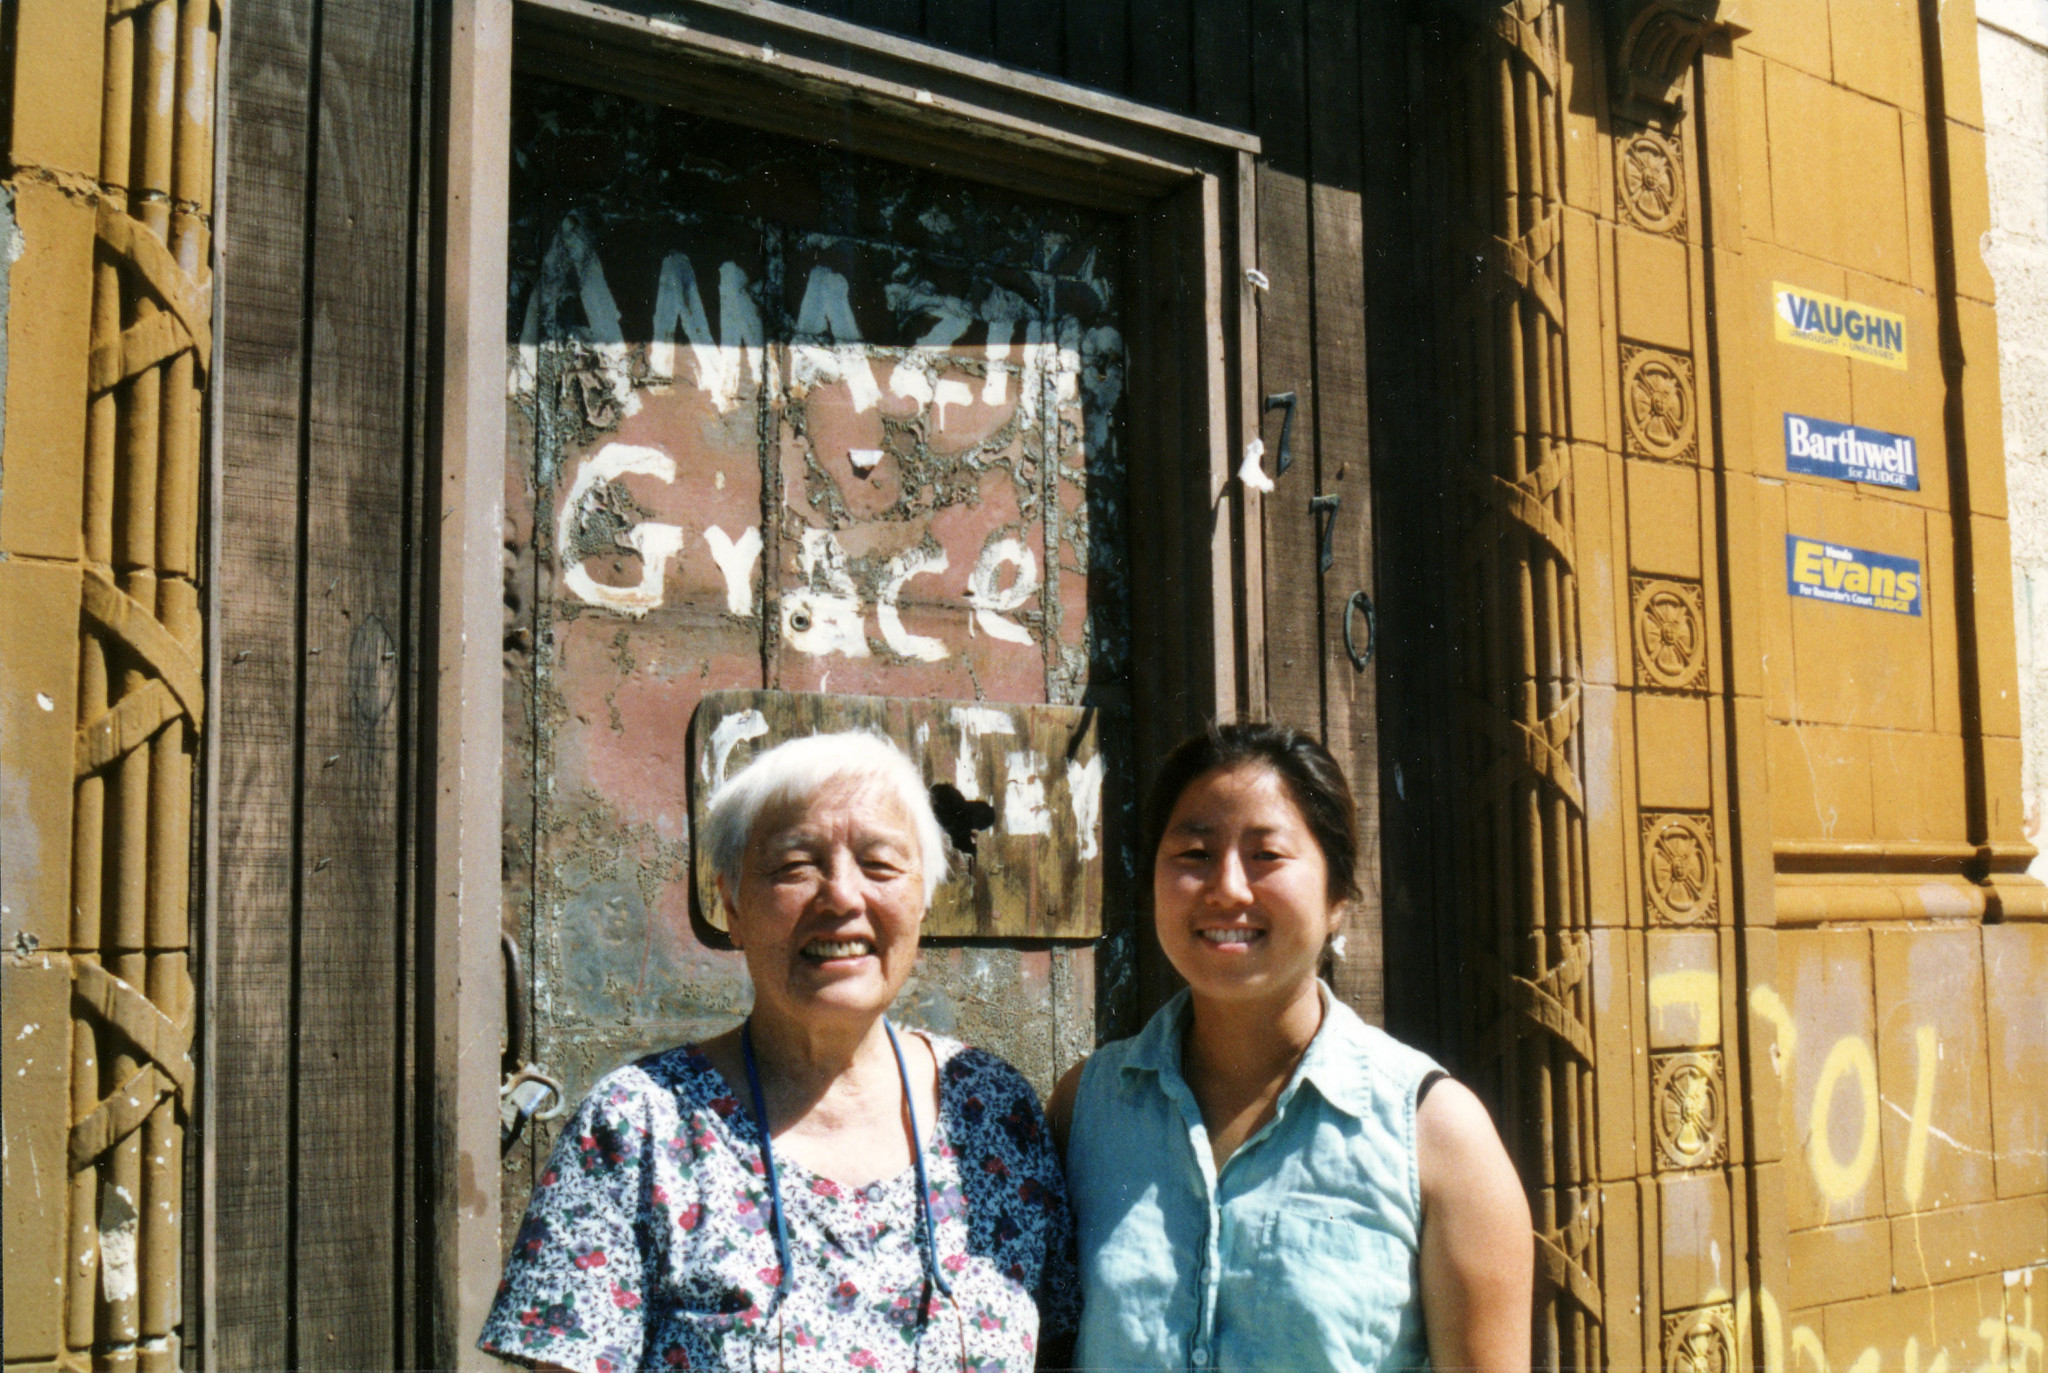 Filmmaker Grace Lee, right, with activist Grace Lee Boggs in the 2005 movie "The Grace Lee Project."